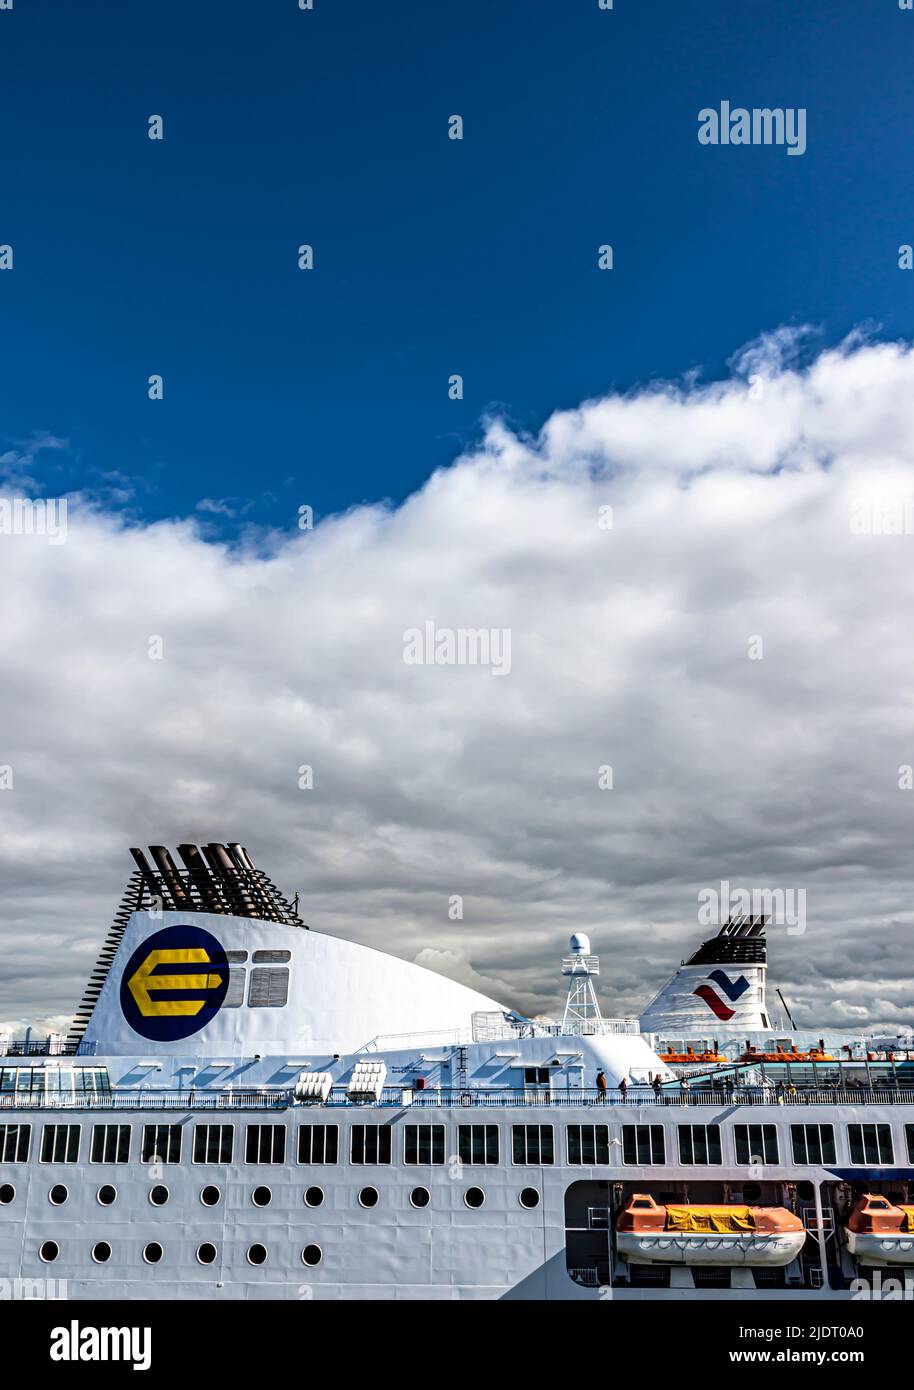 Eckerö Line and Tallink funnel colours on their respective cruiseferries in the Tallinn passenger port. Room for text. Stock Photo